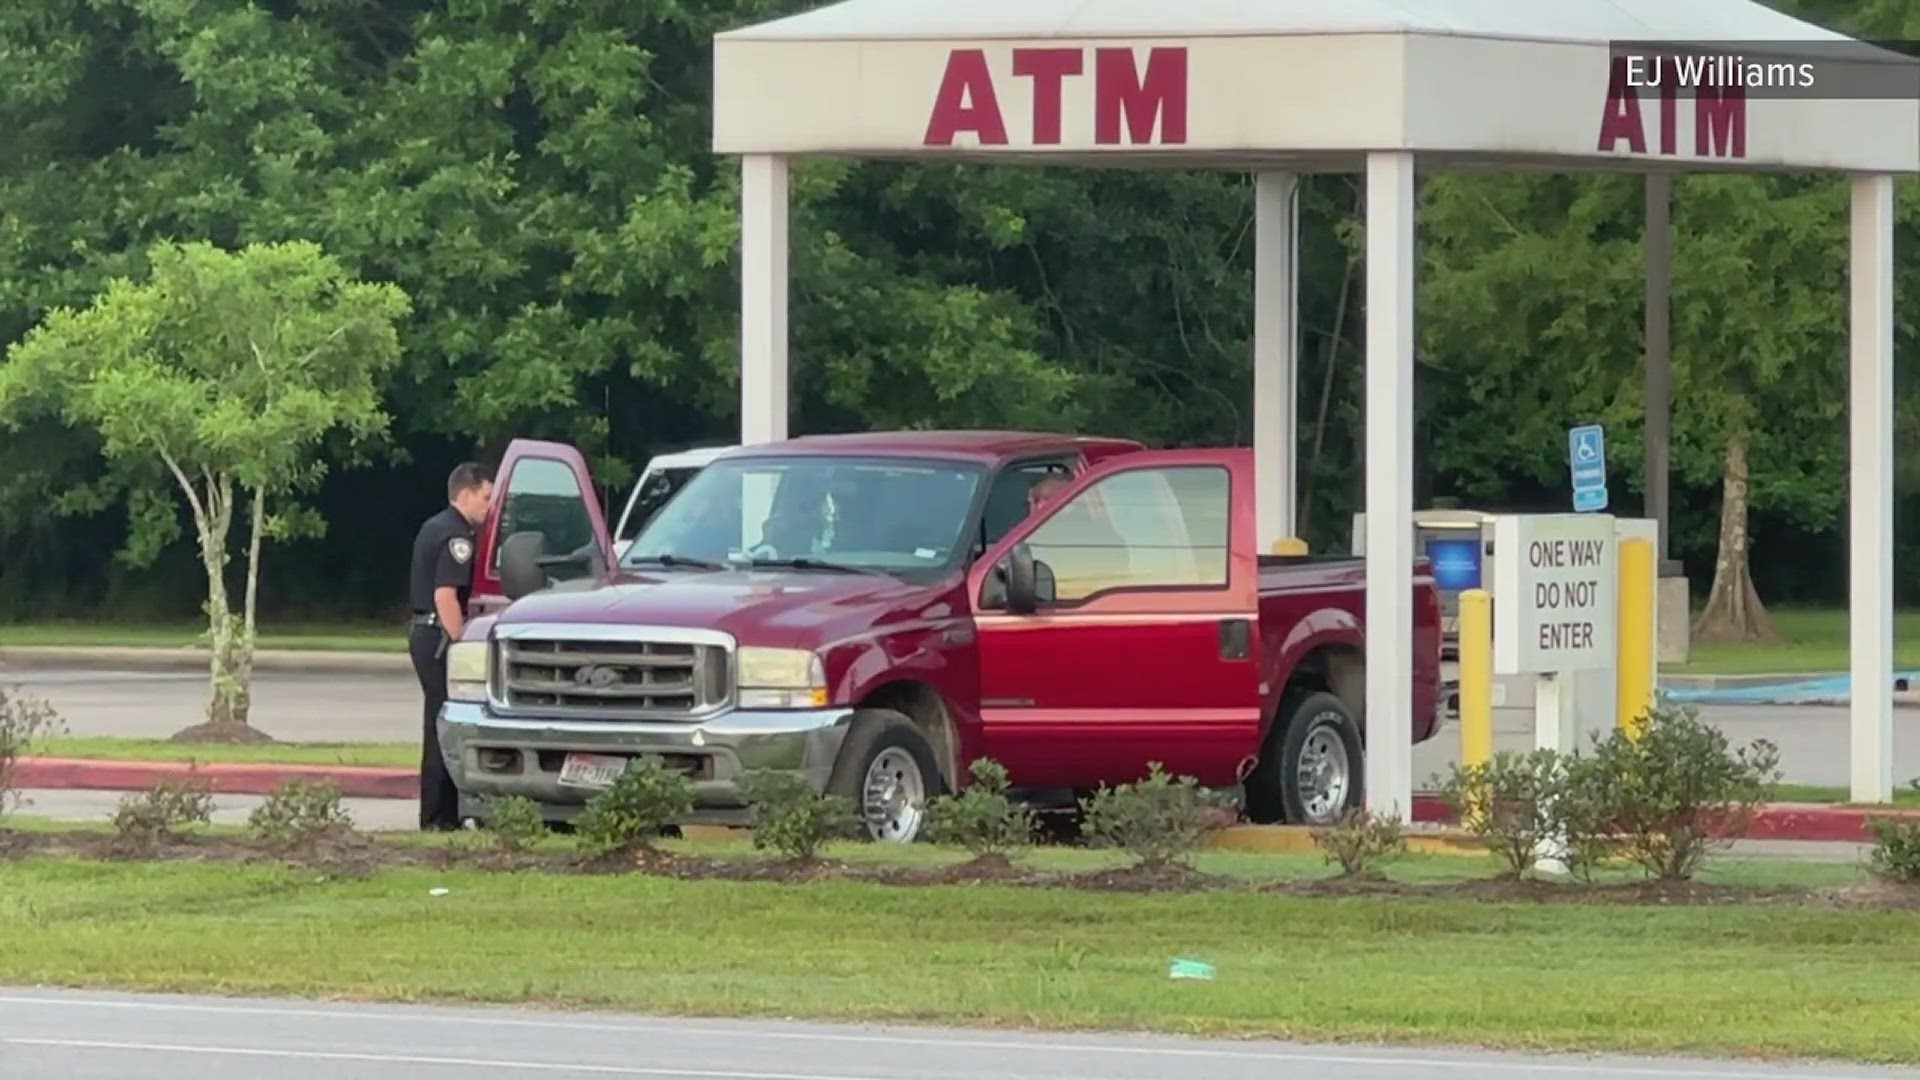 Police in Orange are investigating after someone attempted to break in to an ATM Thursday morning.